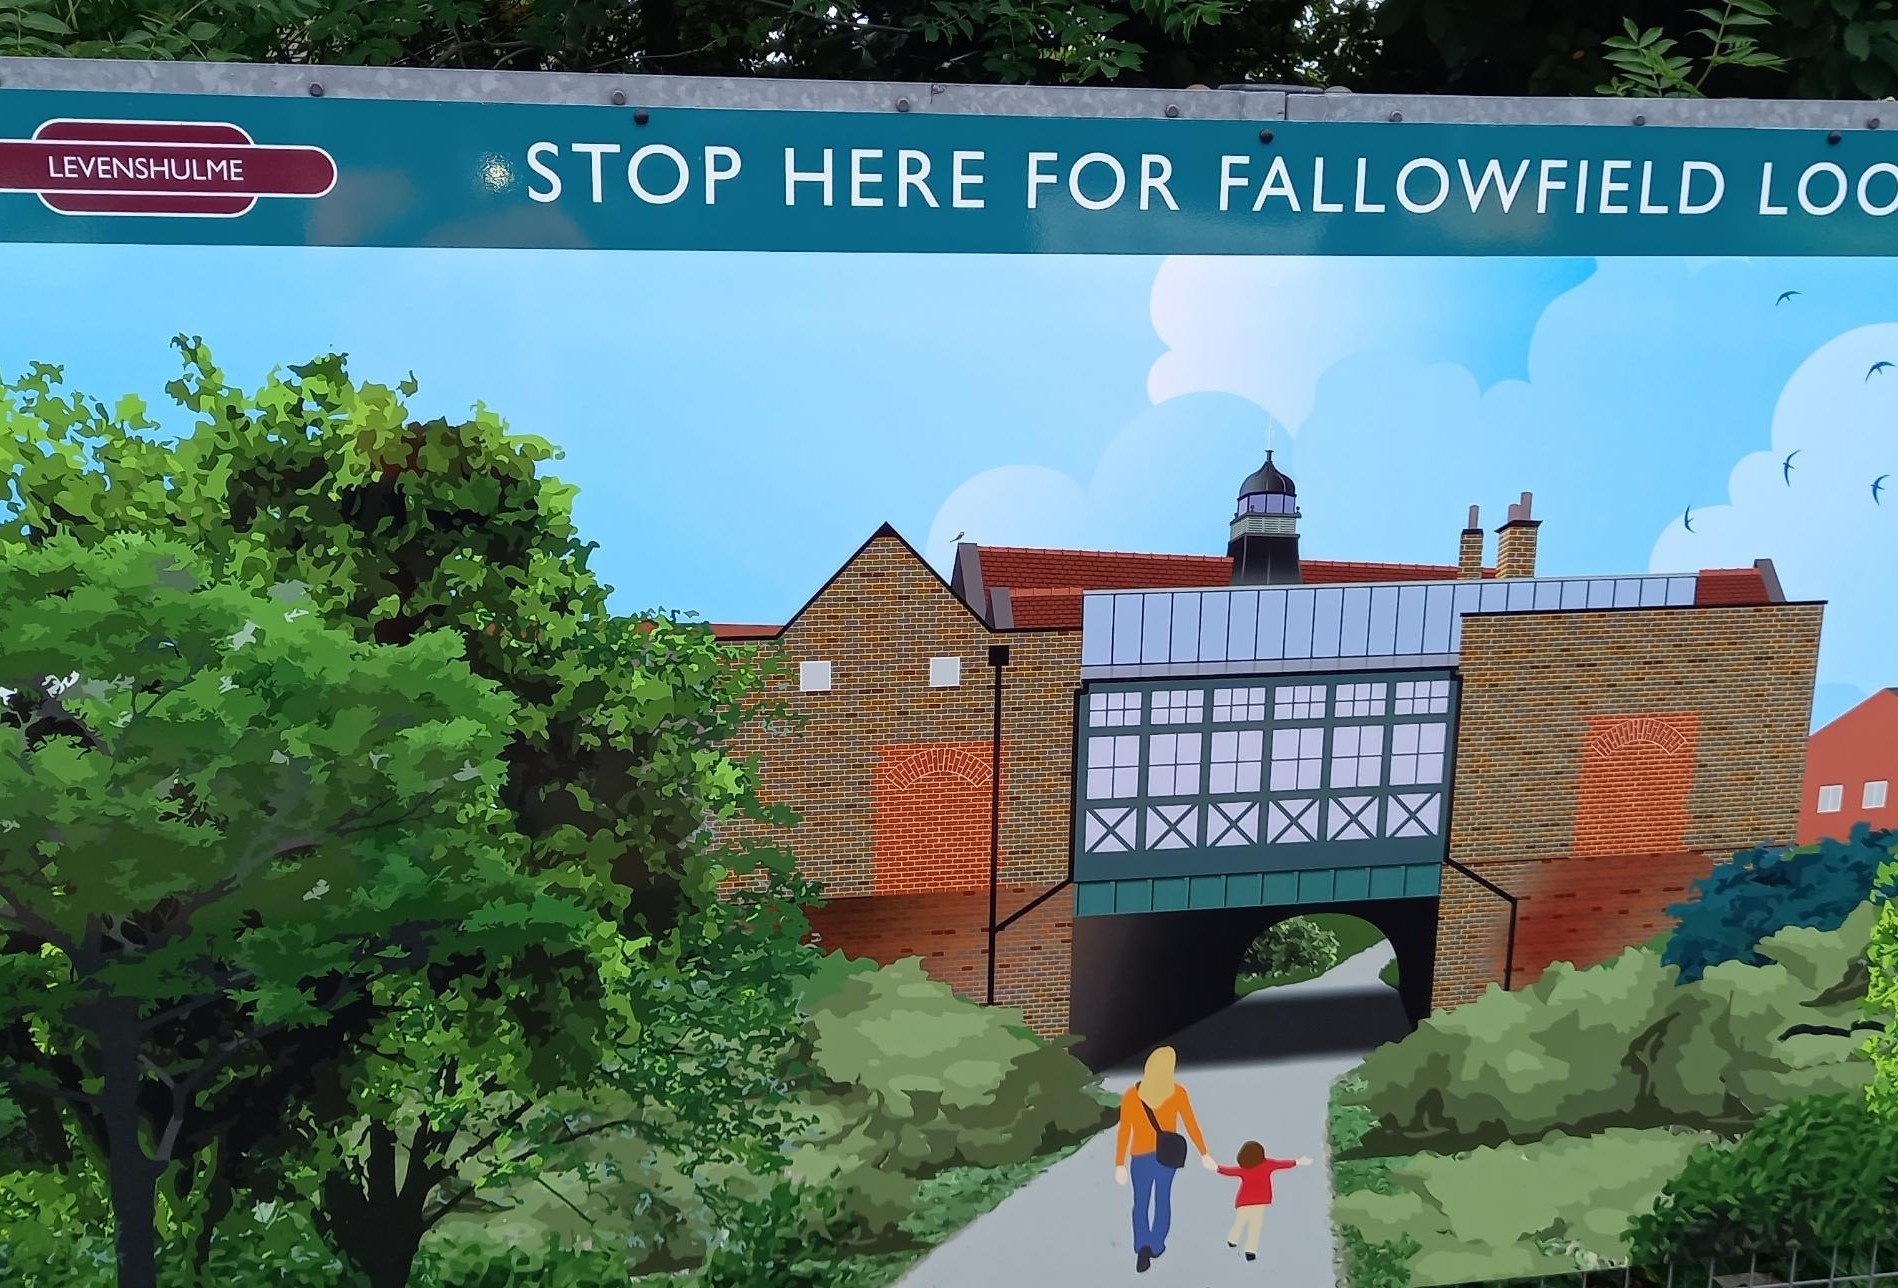 this-image-shows-art-at-levenshulme-depicting-fallowfield-loop